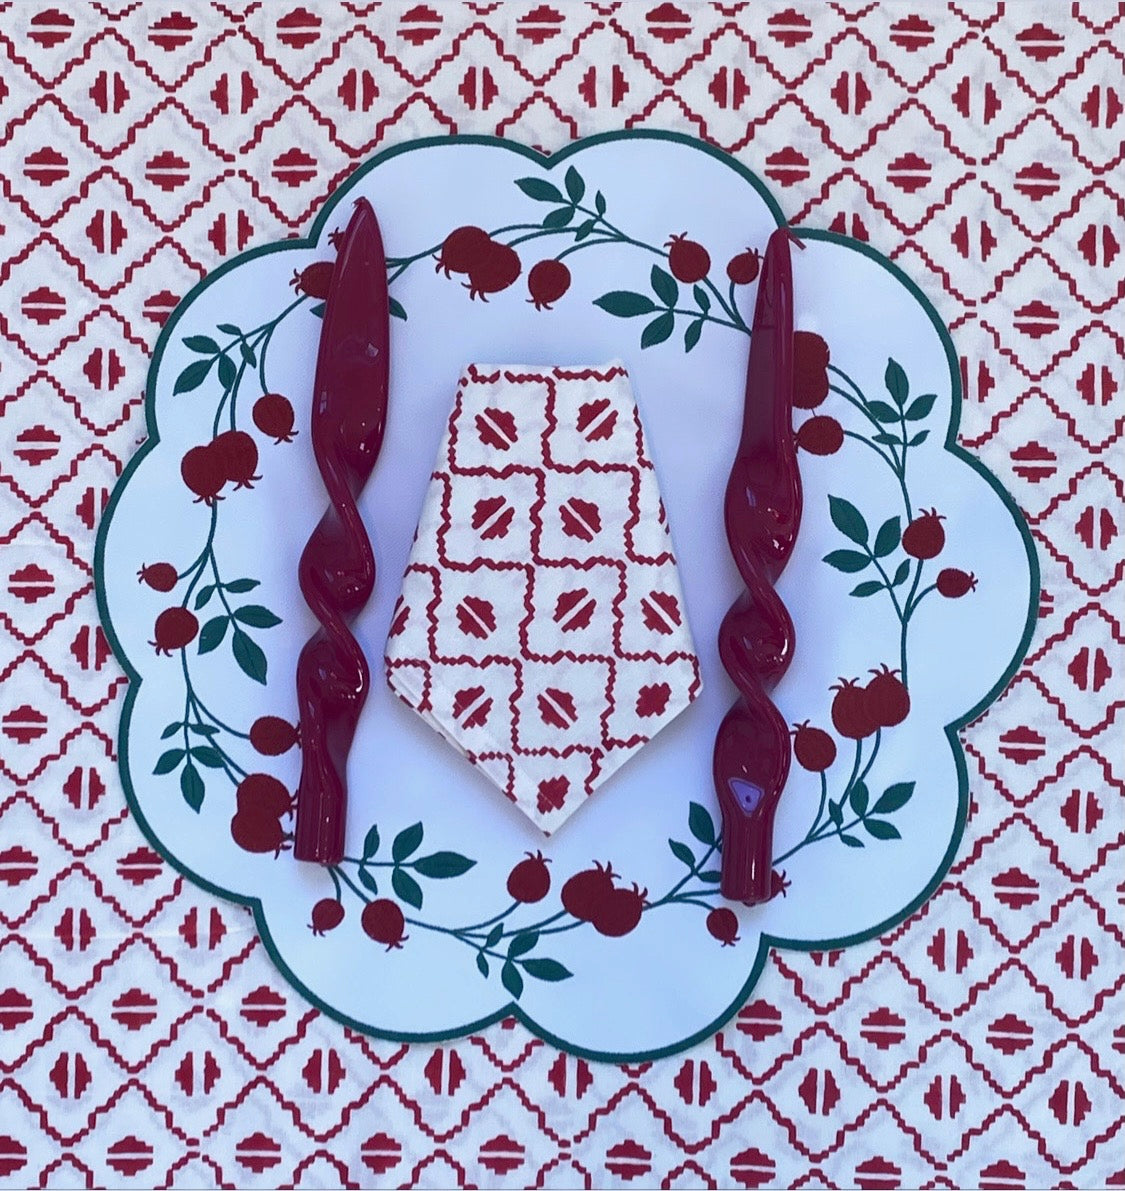 Red and White Coffee Bean Tablecloth